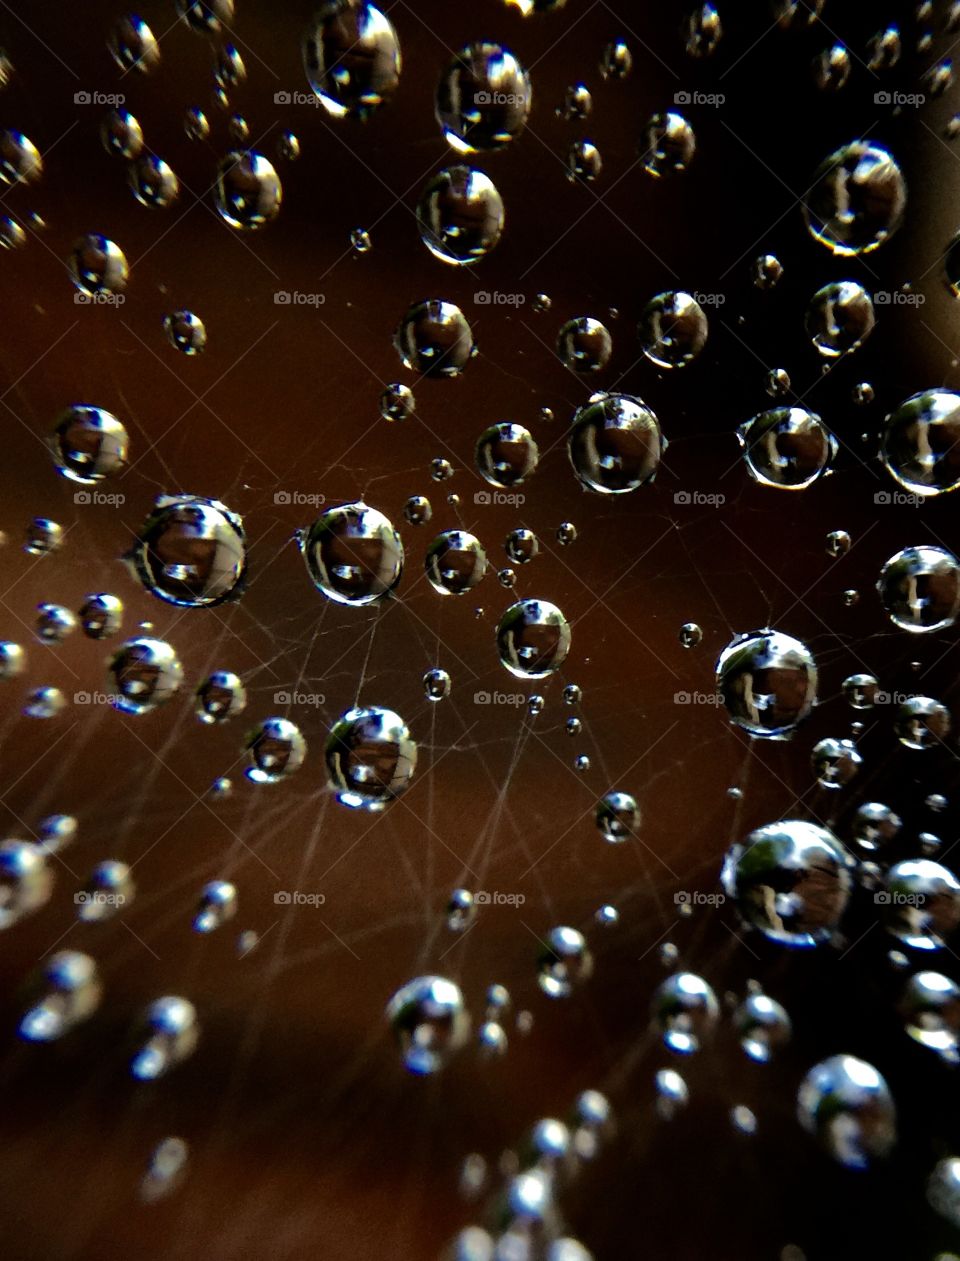 This was also captured after the rain showing its perfect work of art on a spider web